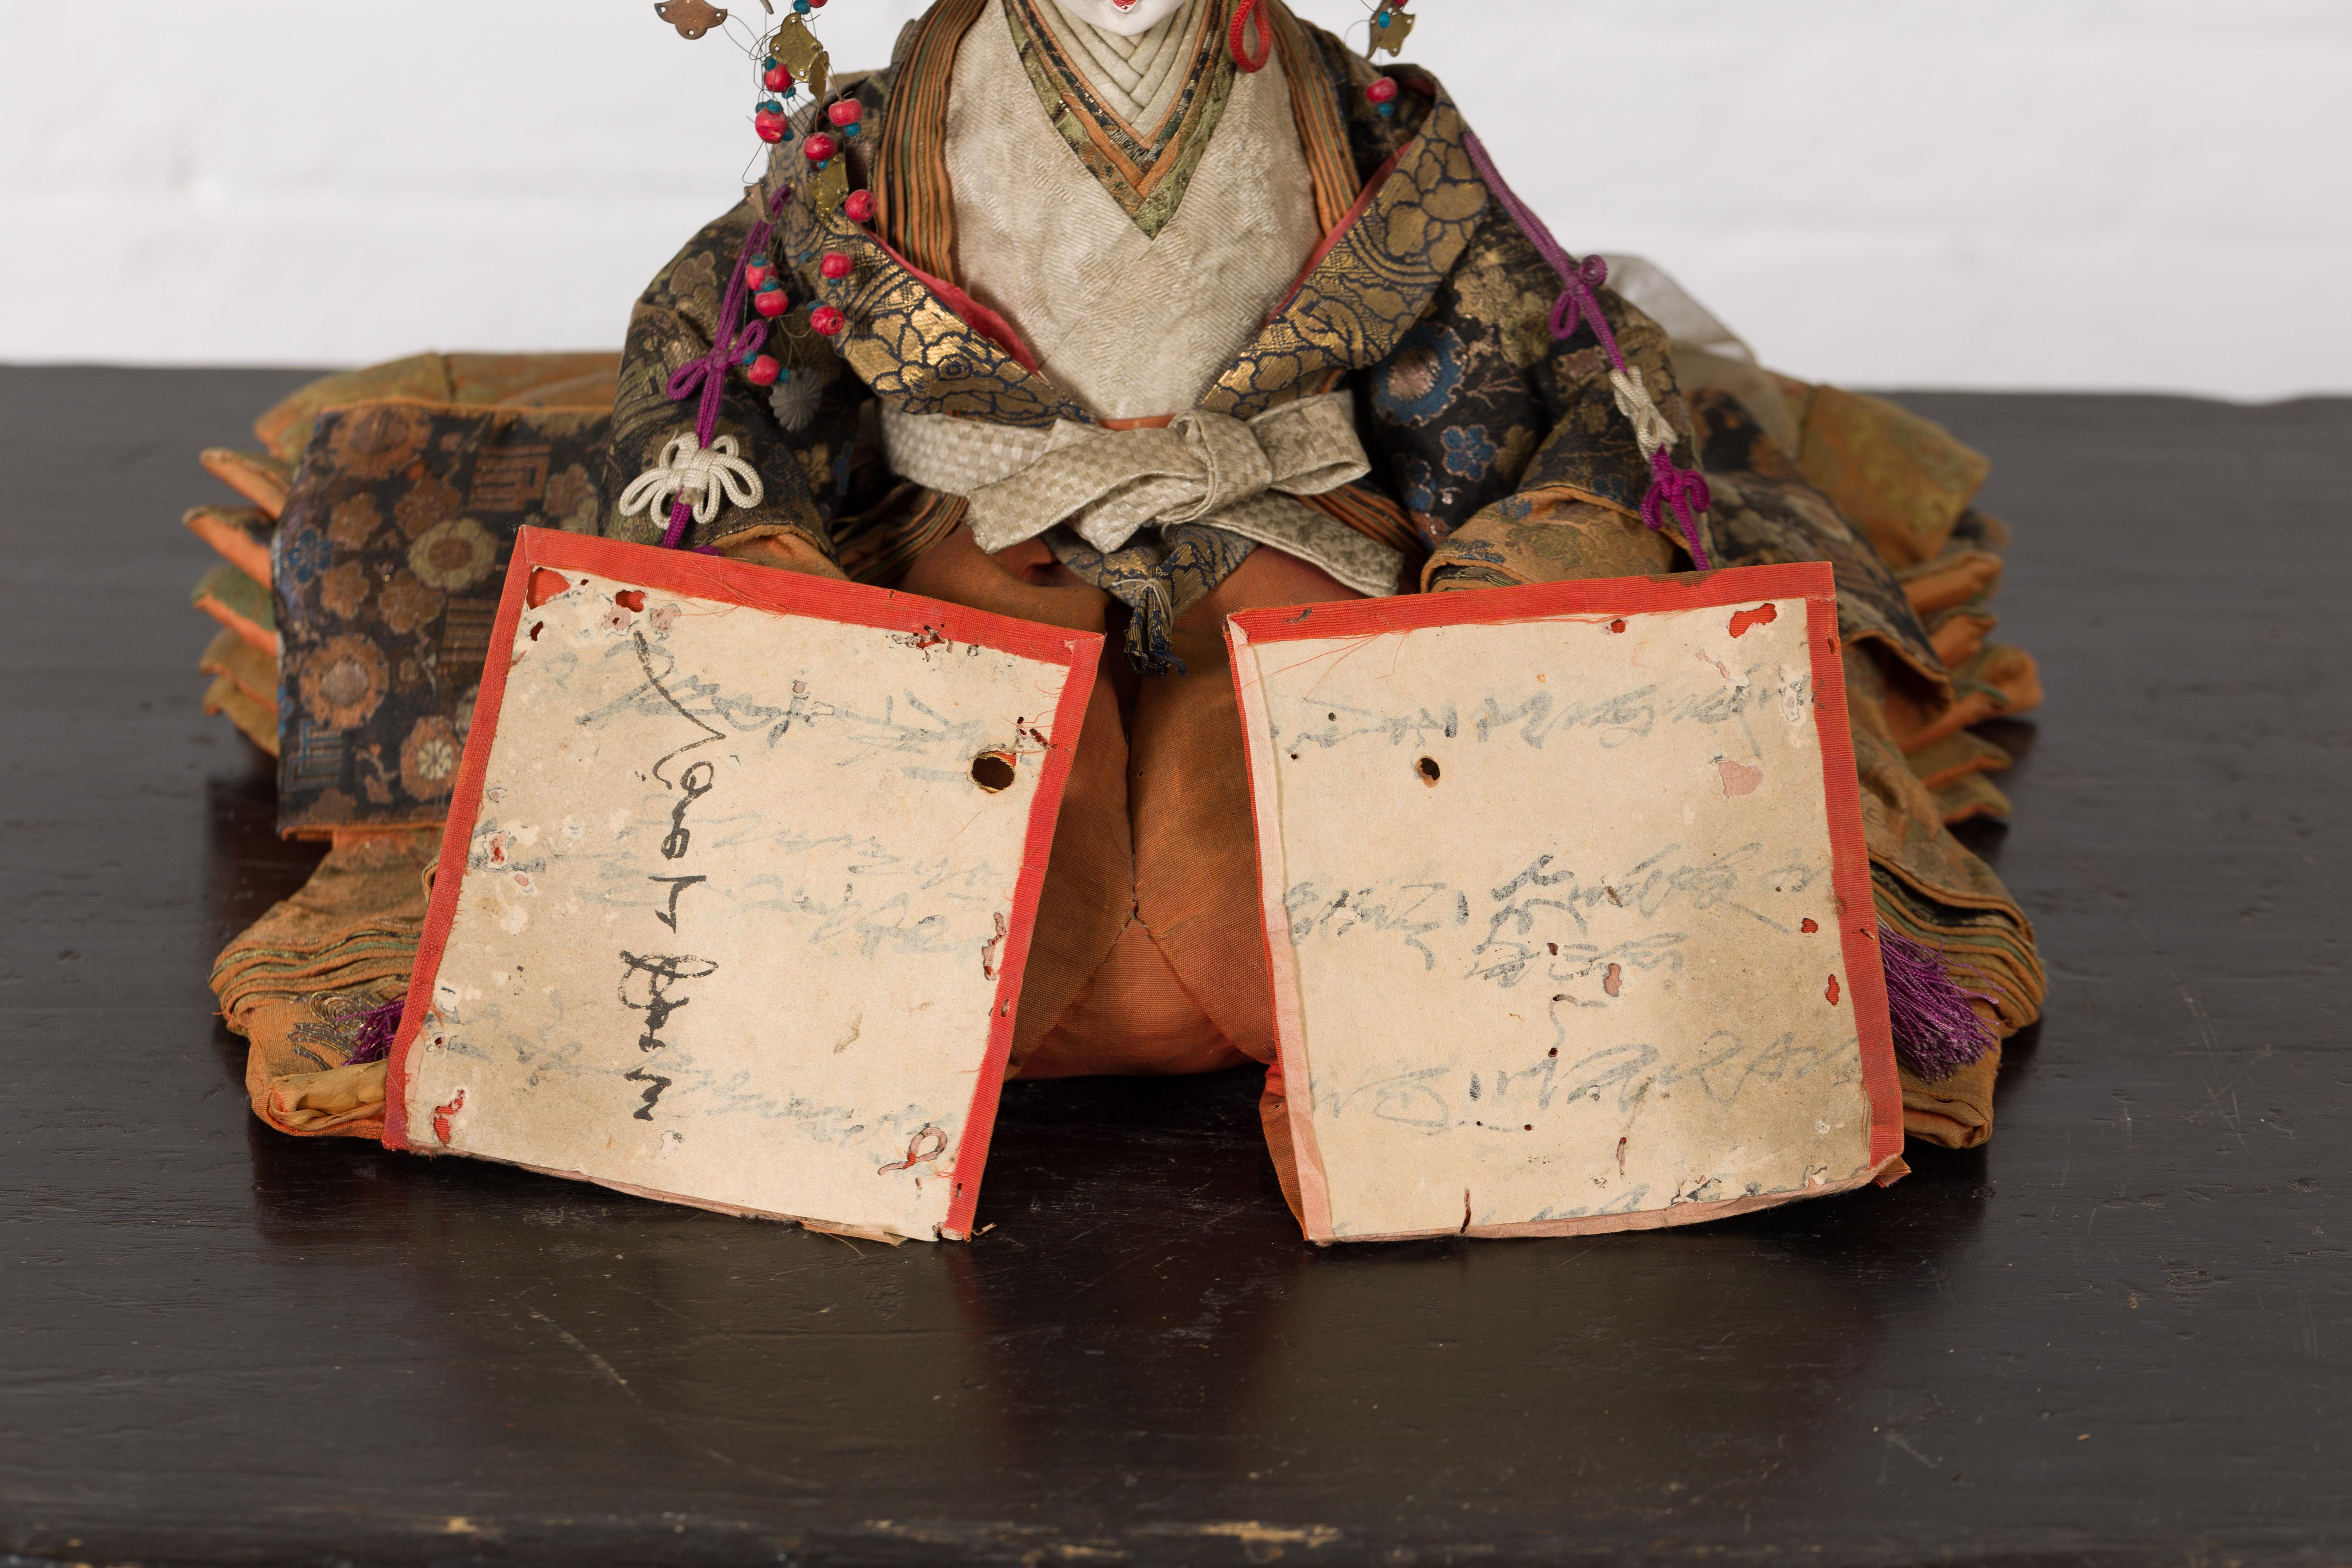 Japanese Taisho Period Sitting Doll with Silk Clothing and Ornate Headdress For Sale 2